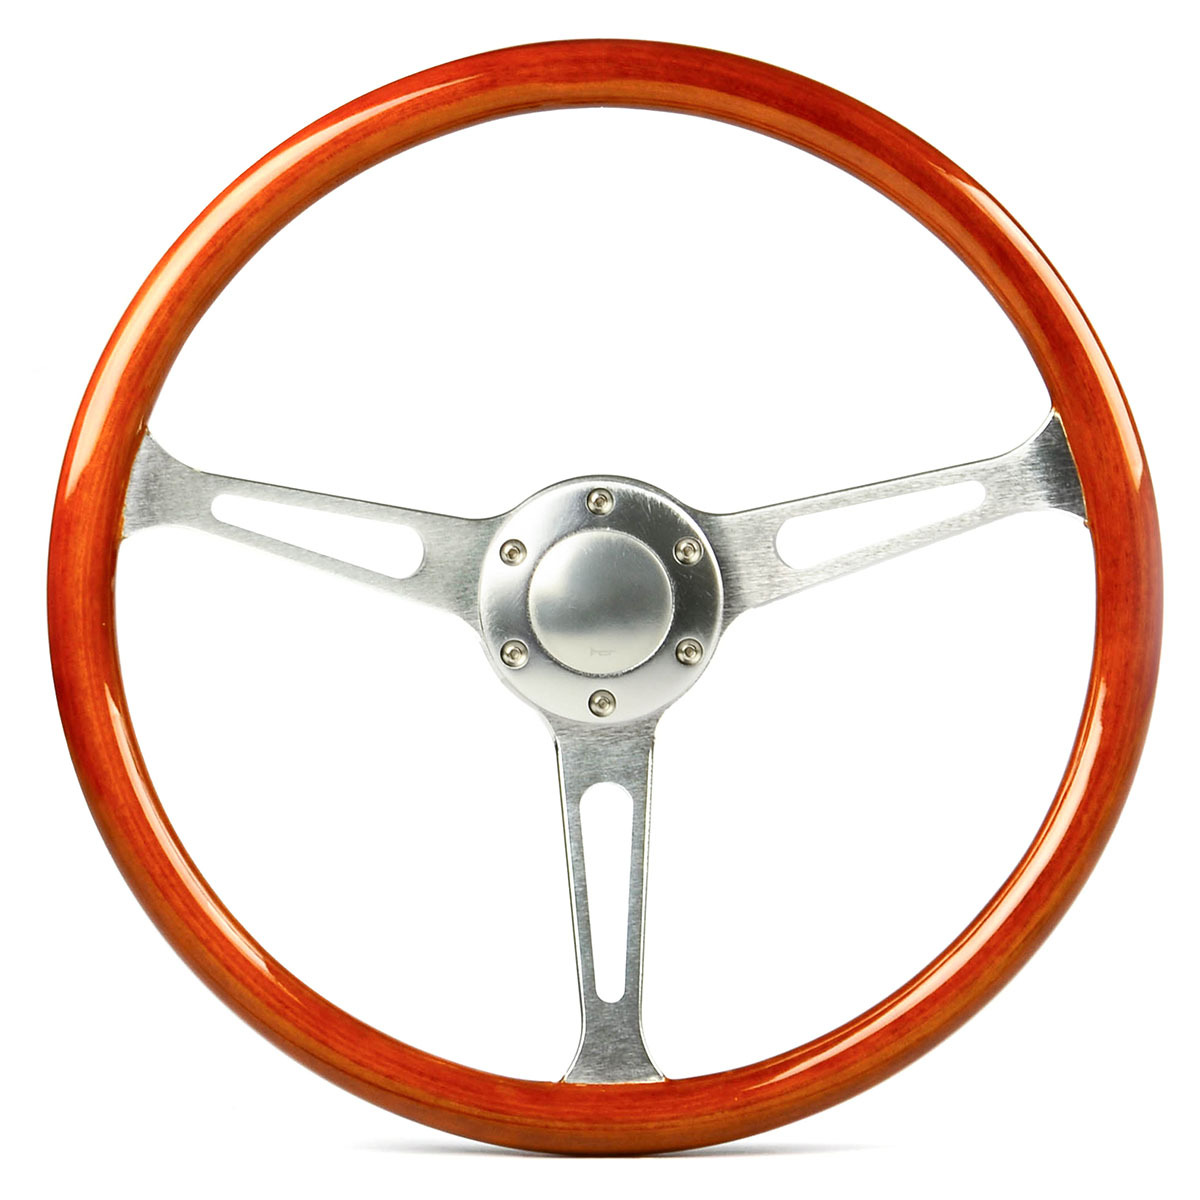 Steering Wheel Wood 15" ADR Classic Brushed Alloy Slotted